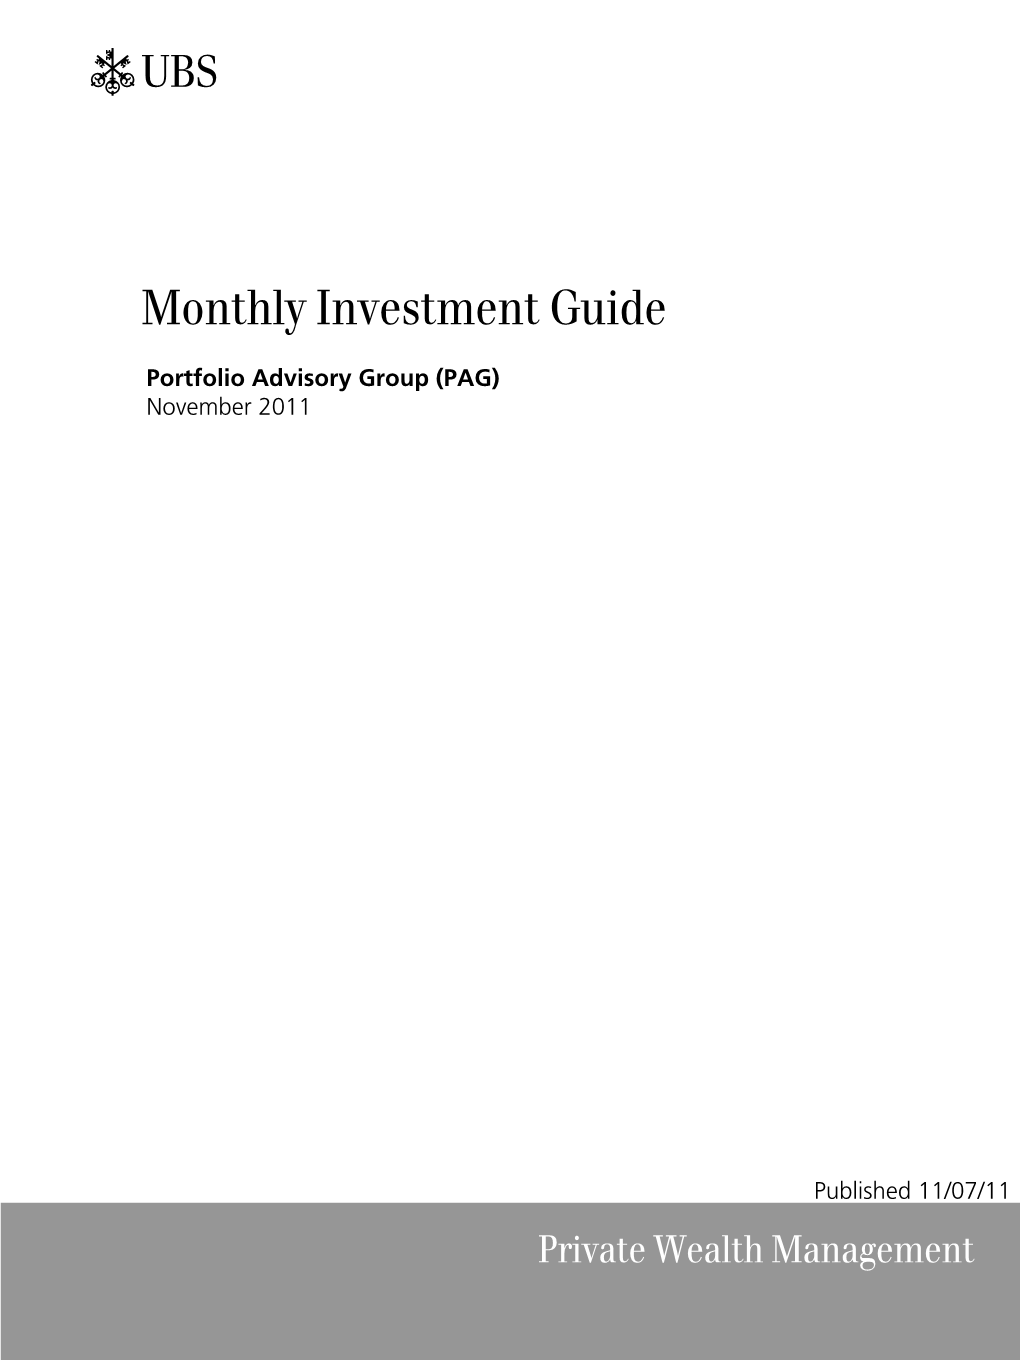 Private Wealth Management Monthly Investment